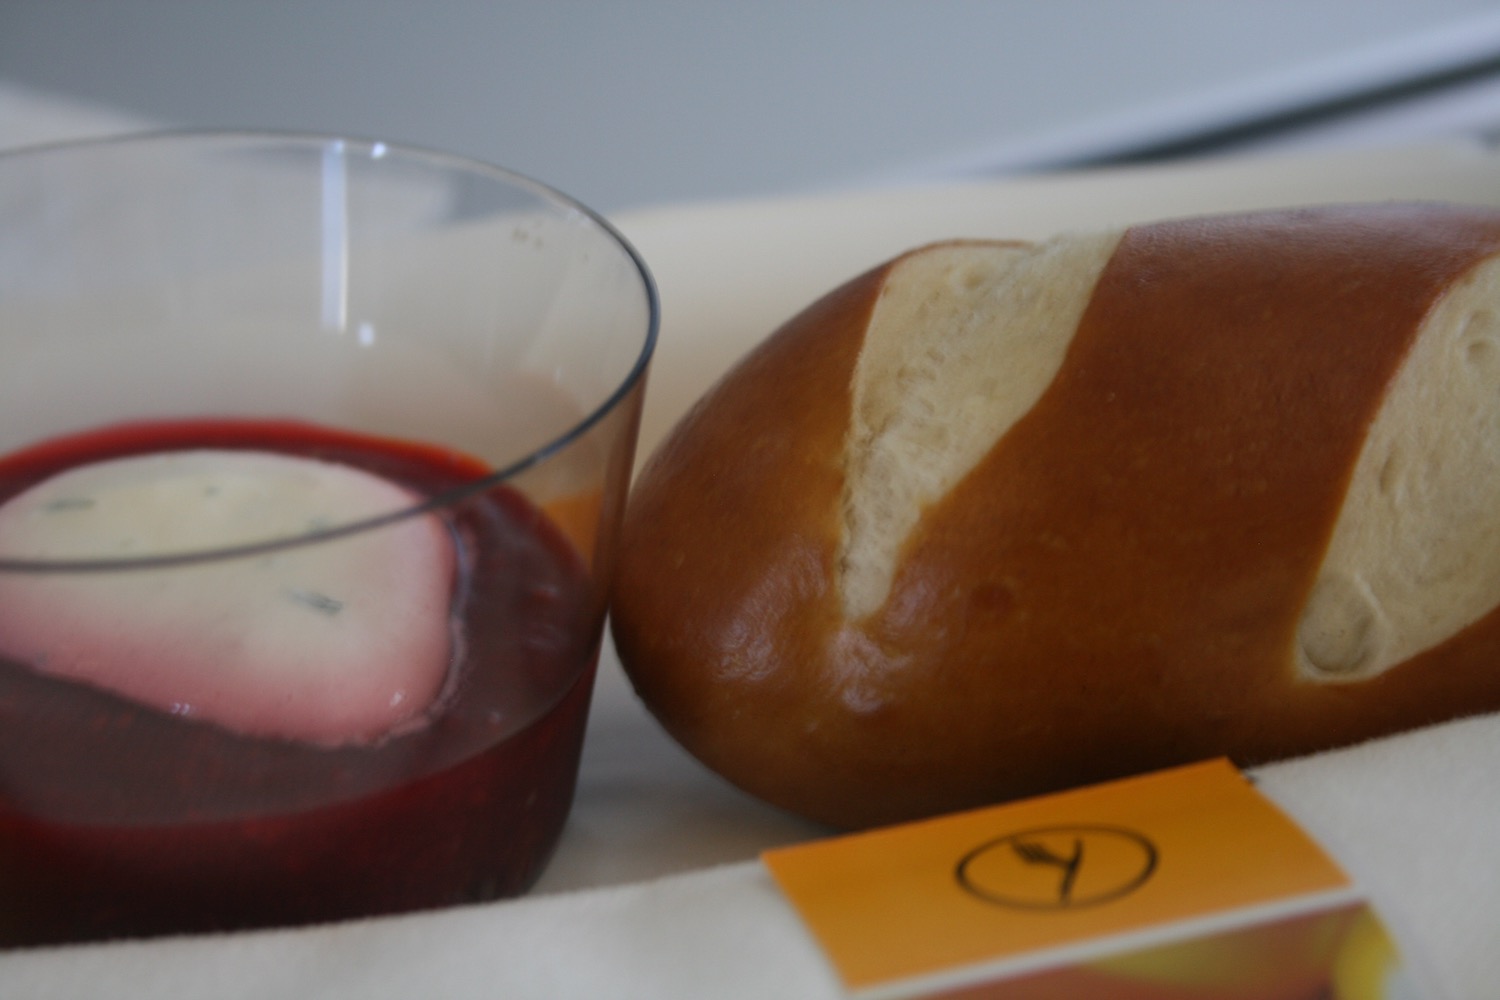 a loaf of bread next to a glass of red liquid